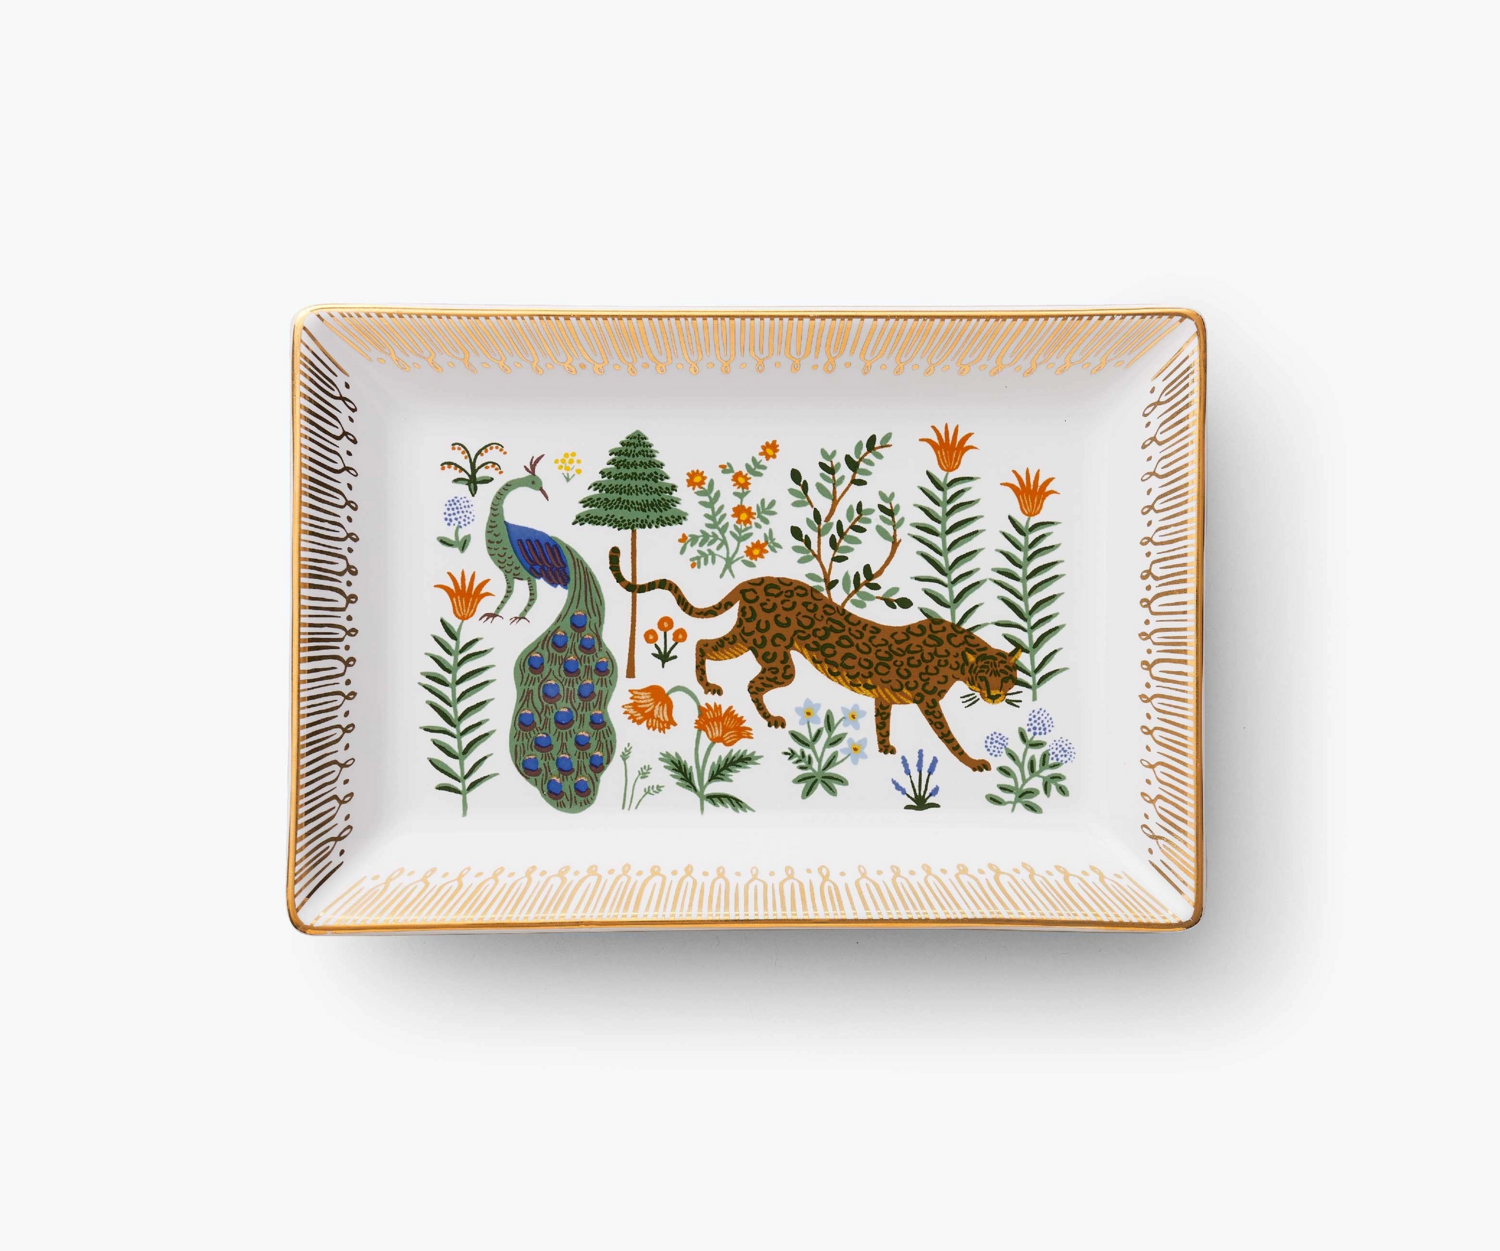 Menagerie Catchall Tray - Rifle Paper Co. RPC60